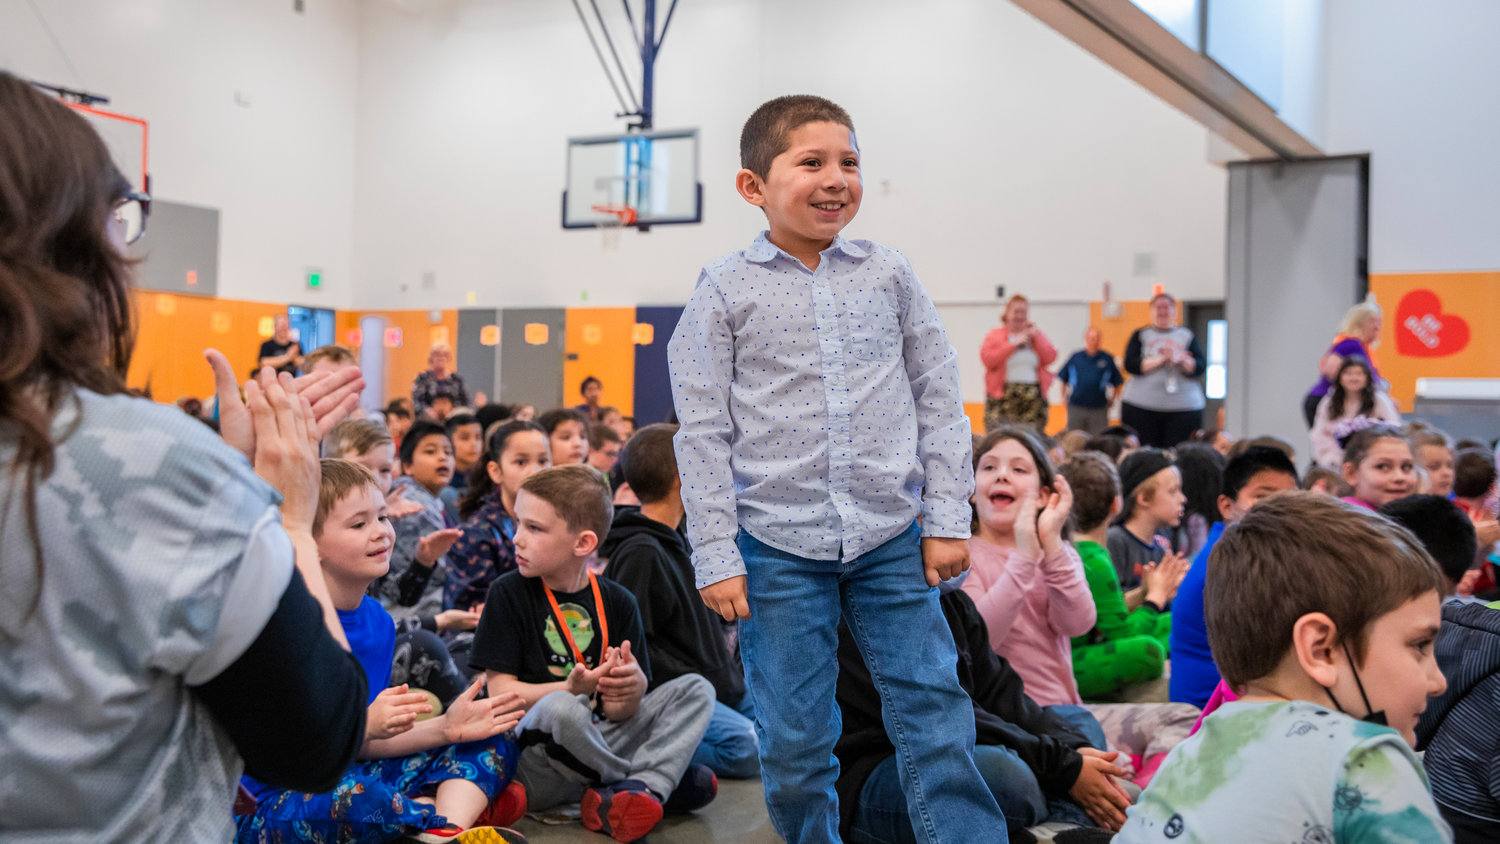 Yoe Rivas smiles and stands to be recognized as he receives the Noah Markstrom Award Friday morning at Fords Prairie Elementary in Centralia.